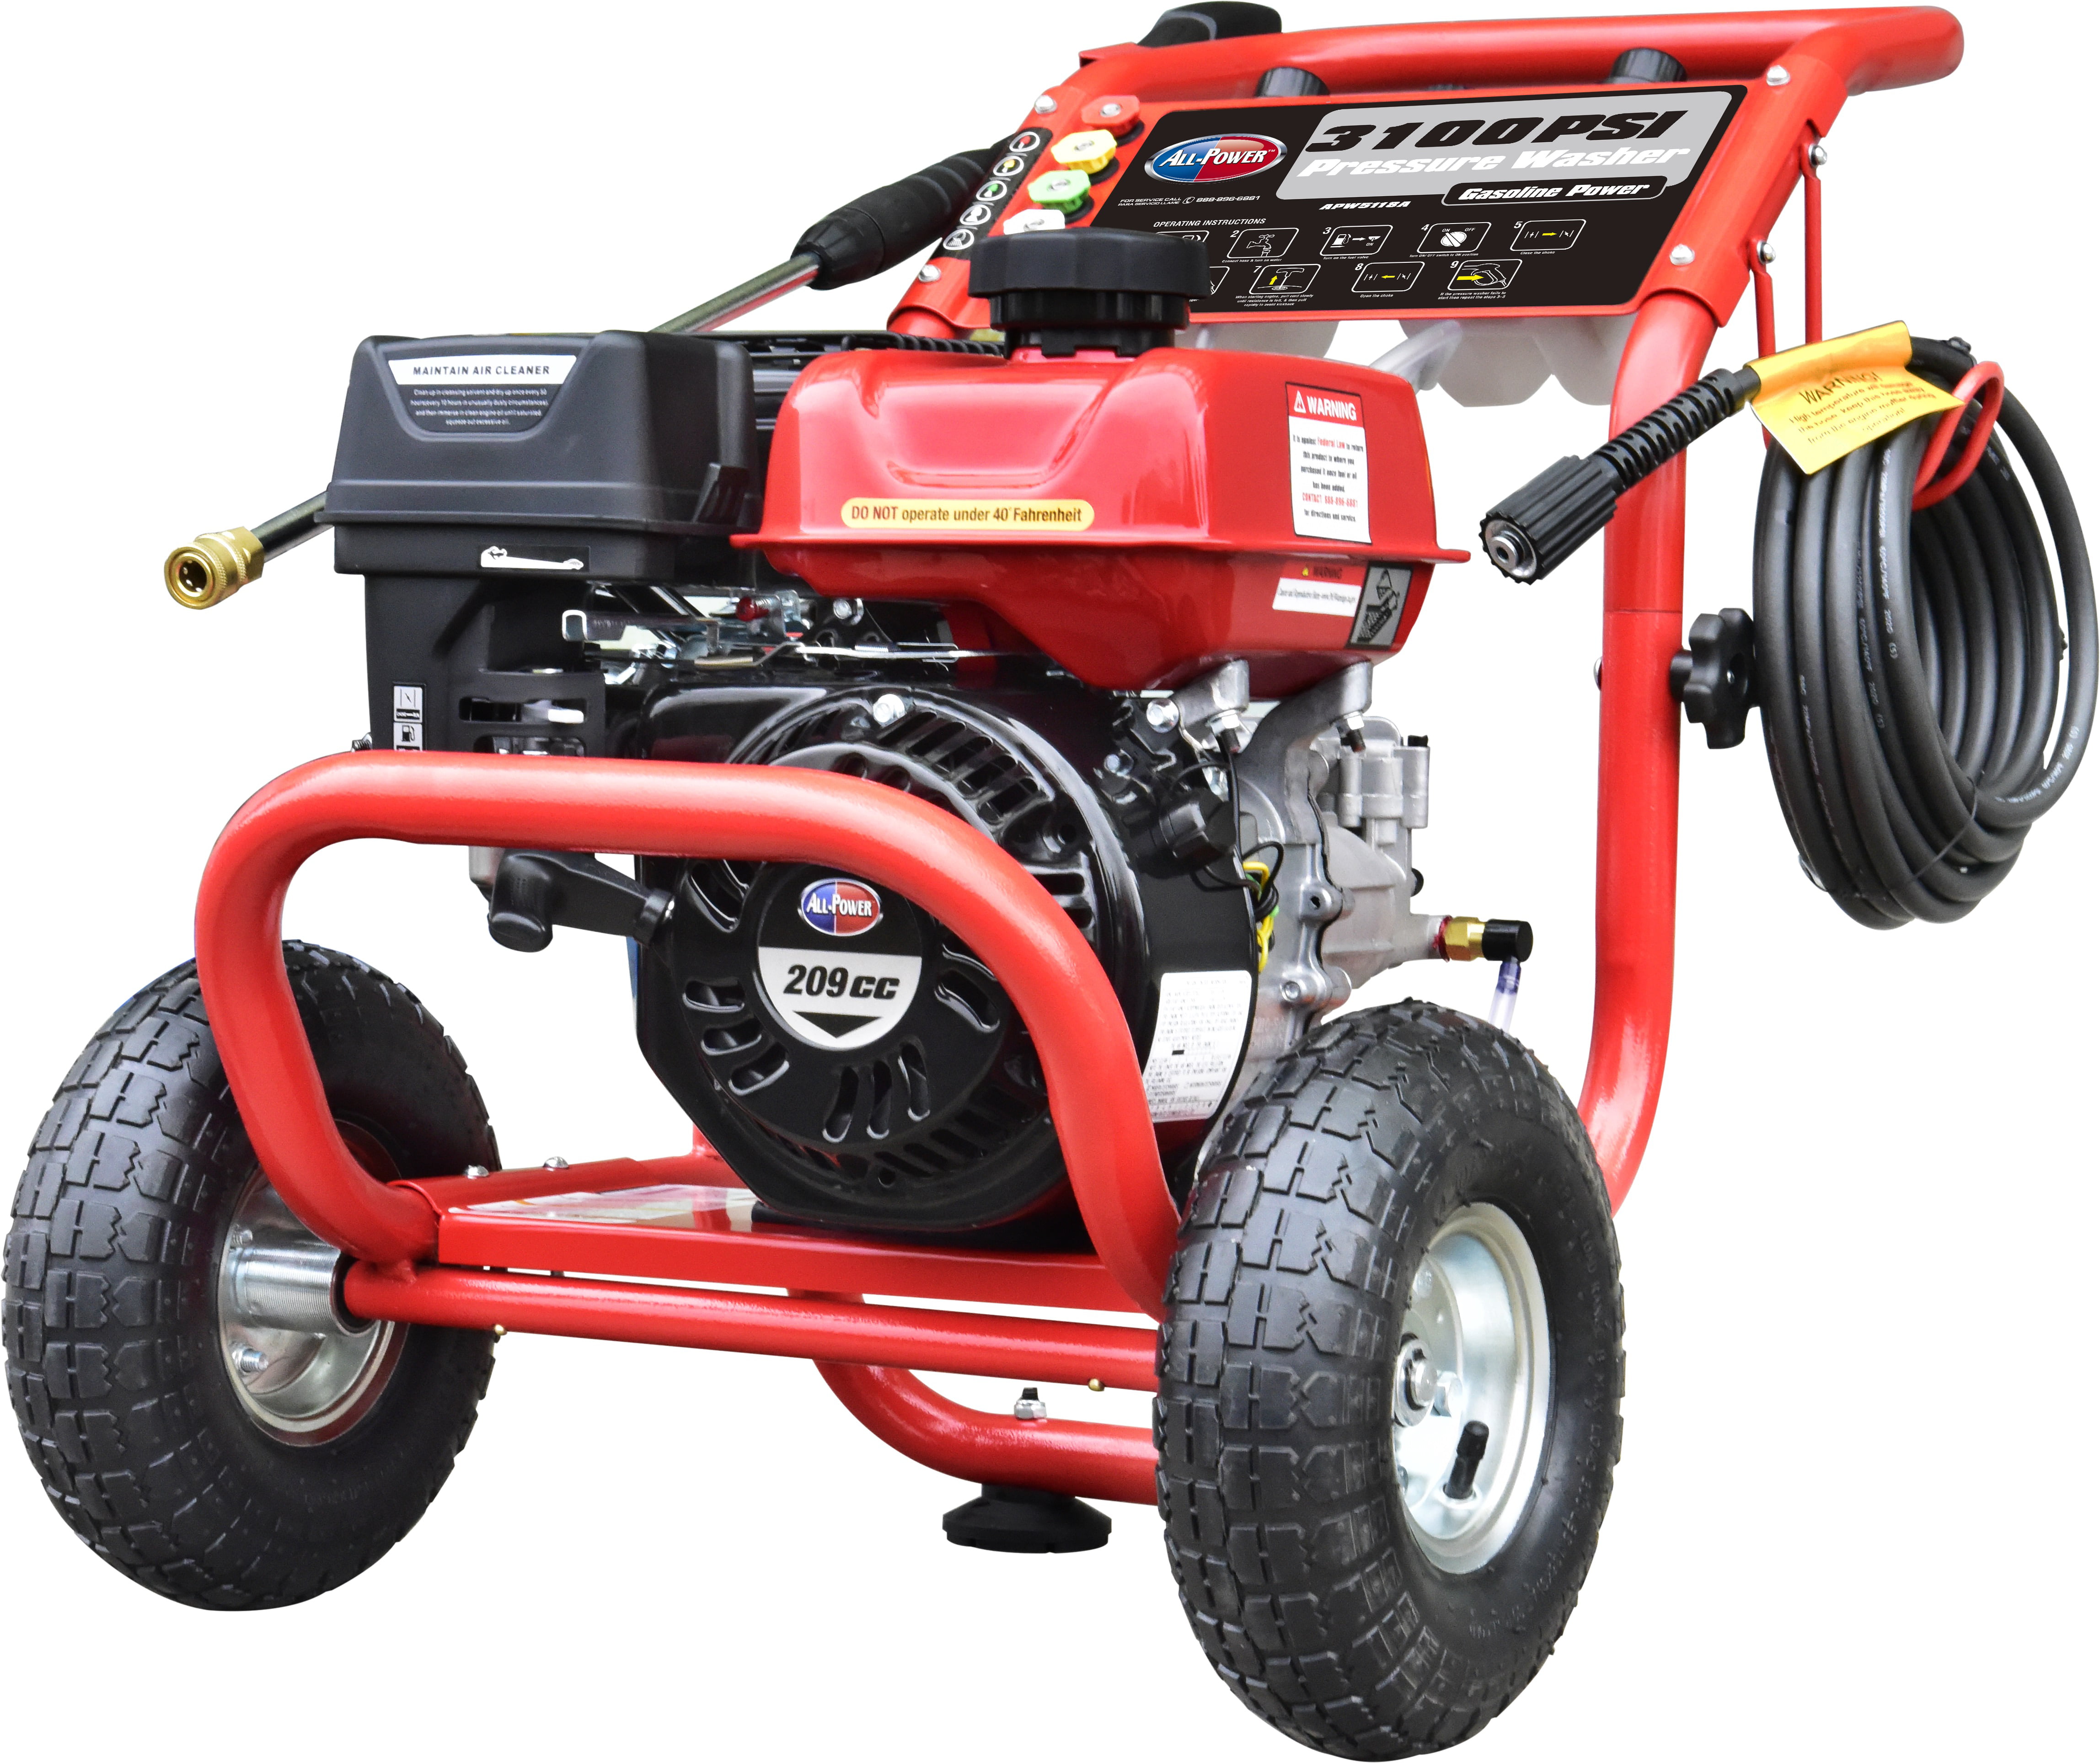 All Power America 3100 PSI, 2.6 GPM Gas Pressure Washer w/ 30 ft High Pressure Hose, C.A.R.B. Compliant, APW5118A - 1